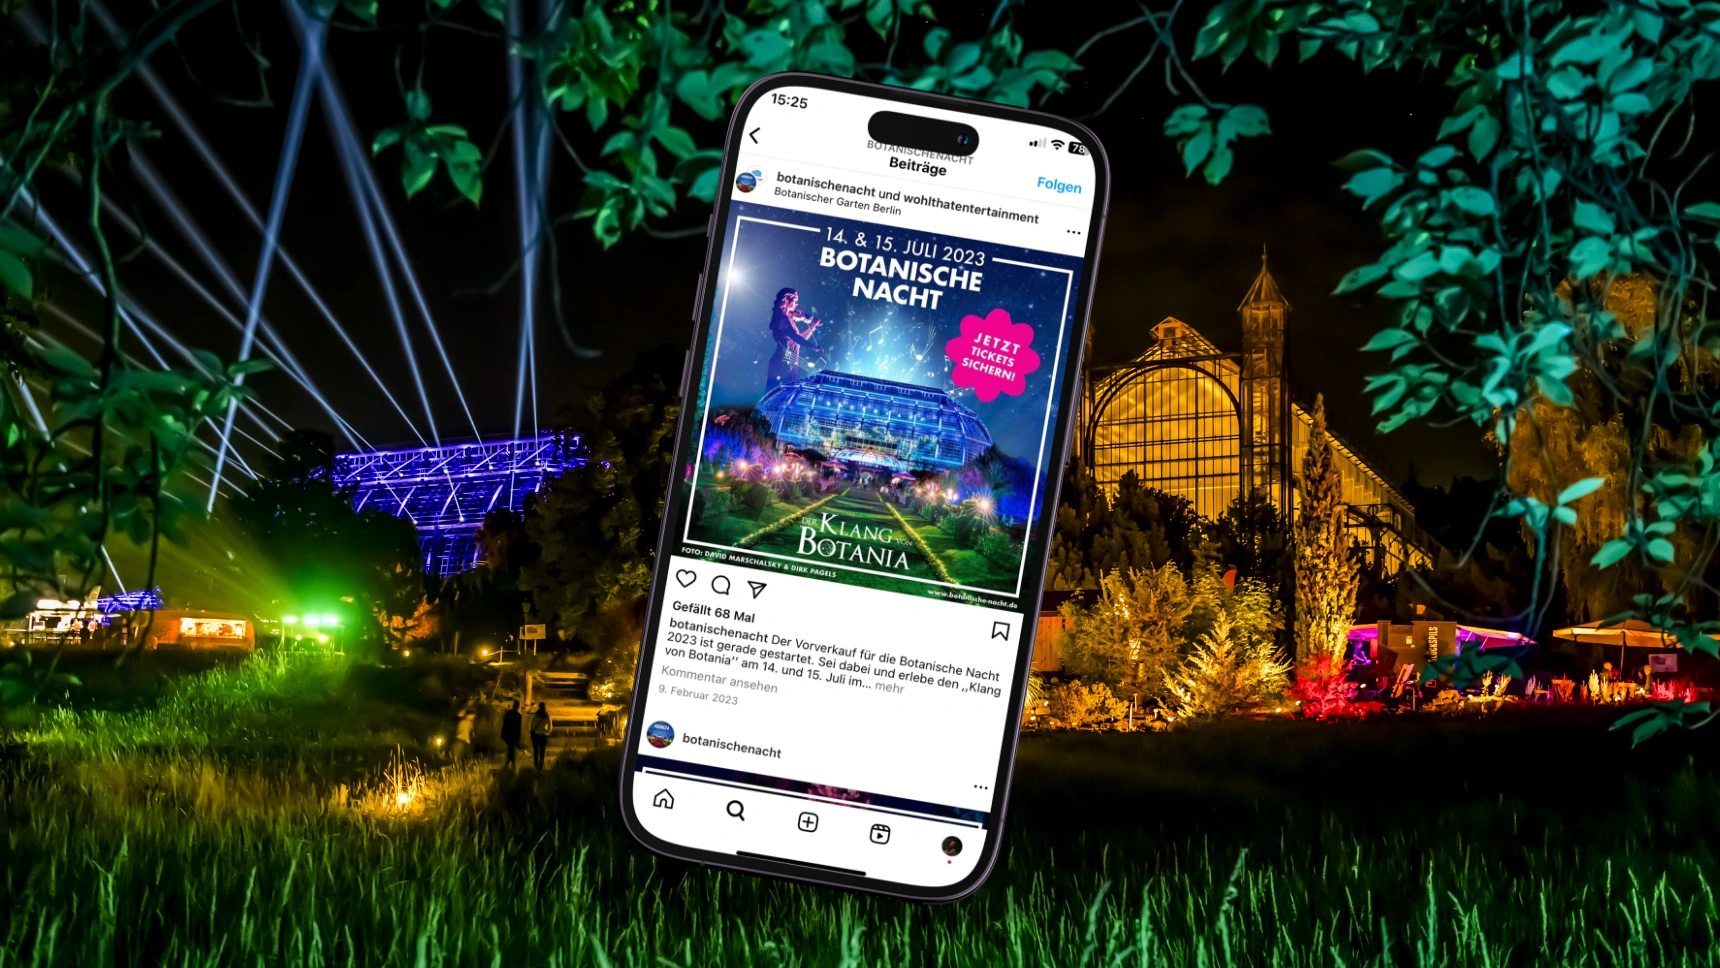 A picture shows the Botanical Night in the Botanical Garden Berlin and in the middle a smartphone with an Instagram post about the Botanical Night 2023.